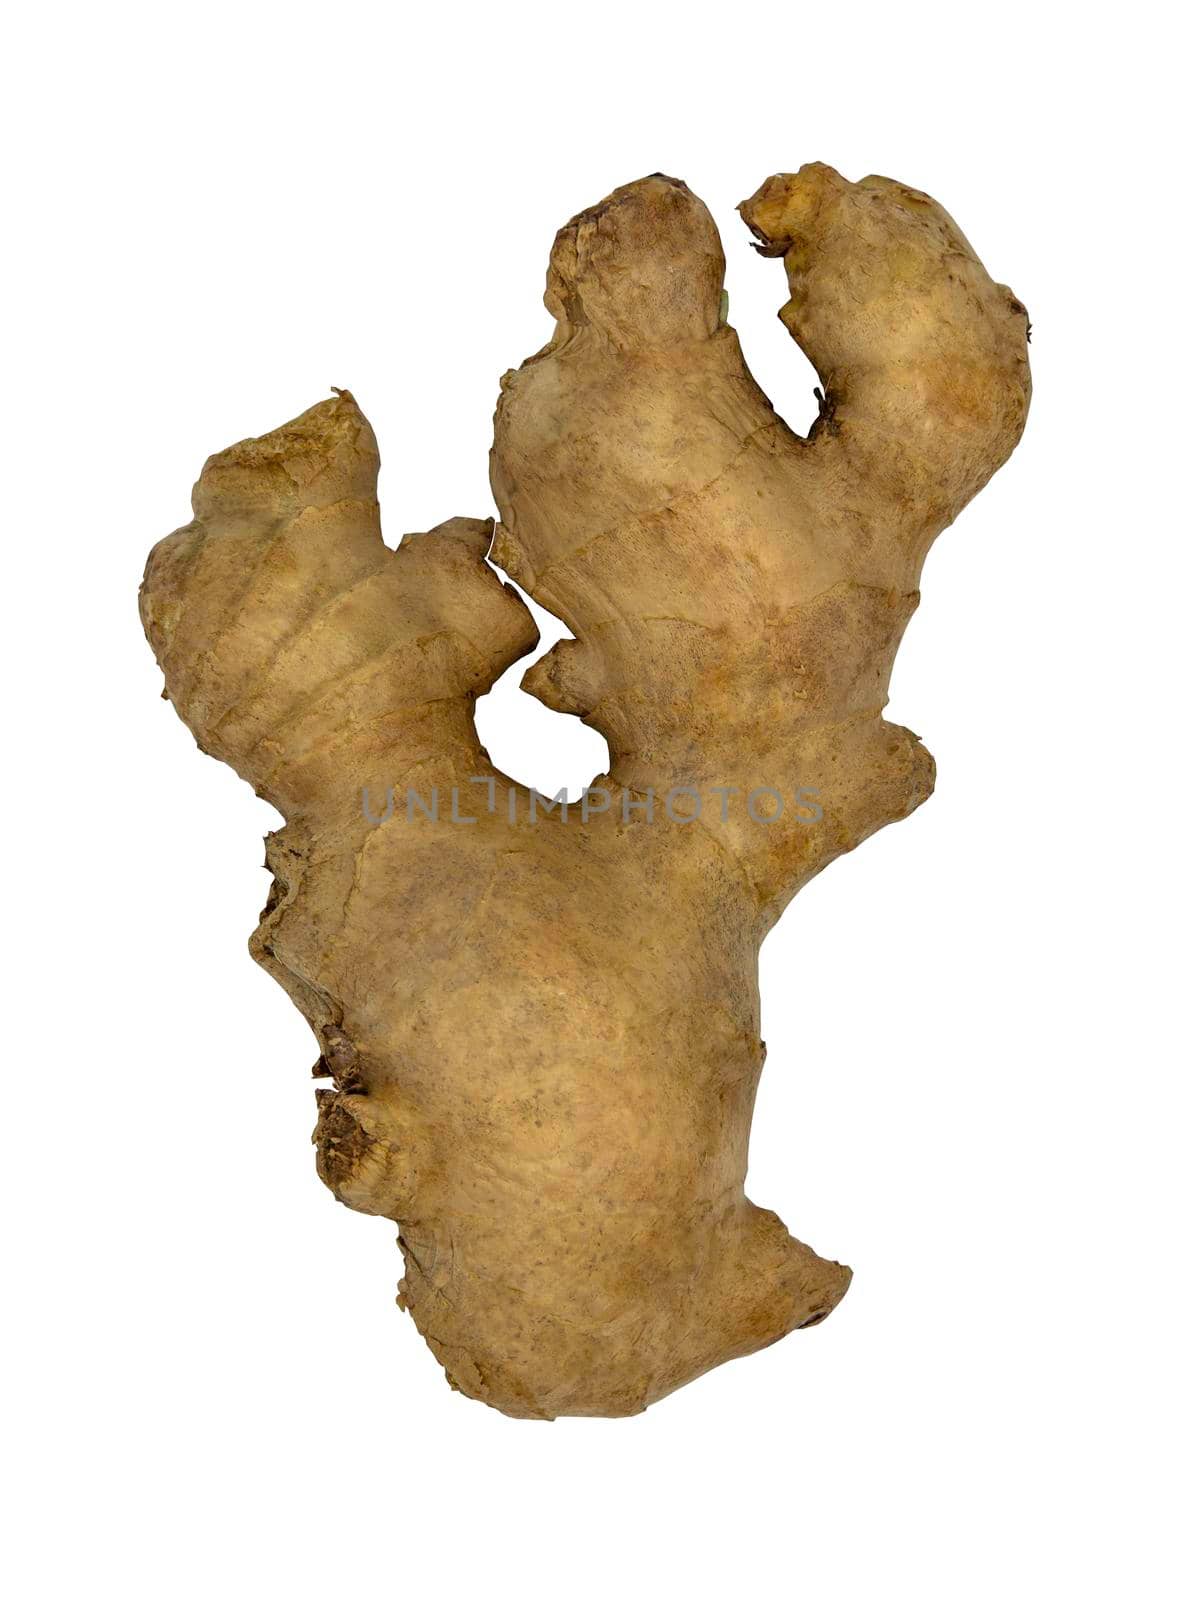 Fresh ginger rhizome isolated on white background with clipping path. Selective focus.